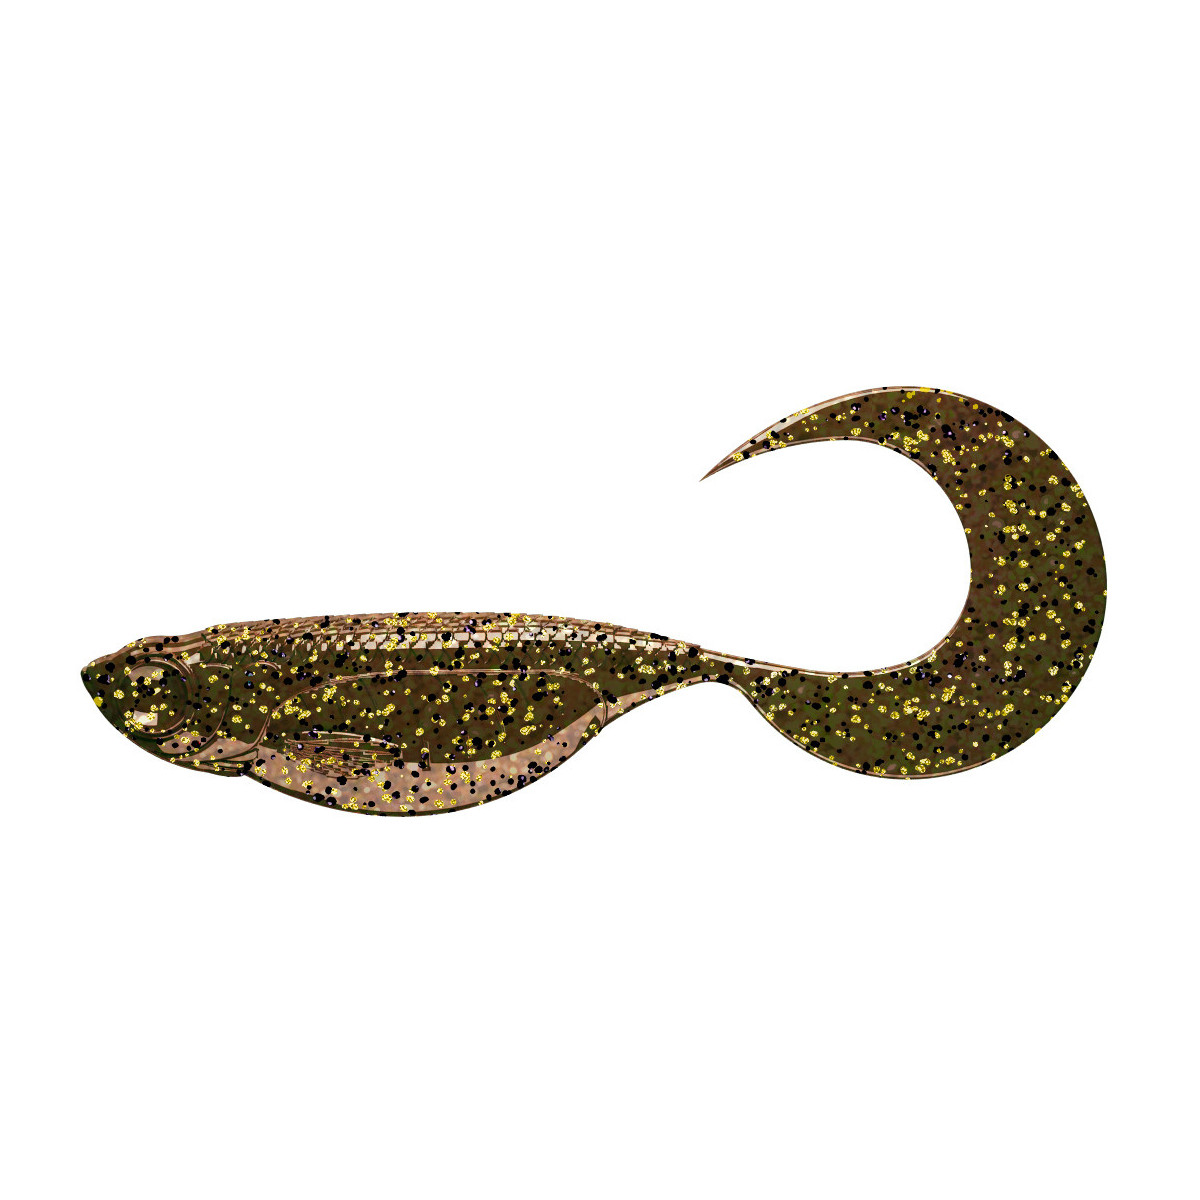 Libra Lures Embrion Twist Tail 2.5'' 6.3cm - 033 / MOTOR OIL BROWN